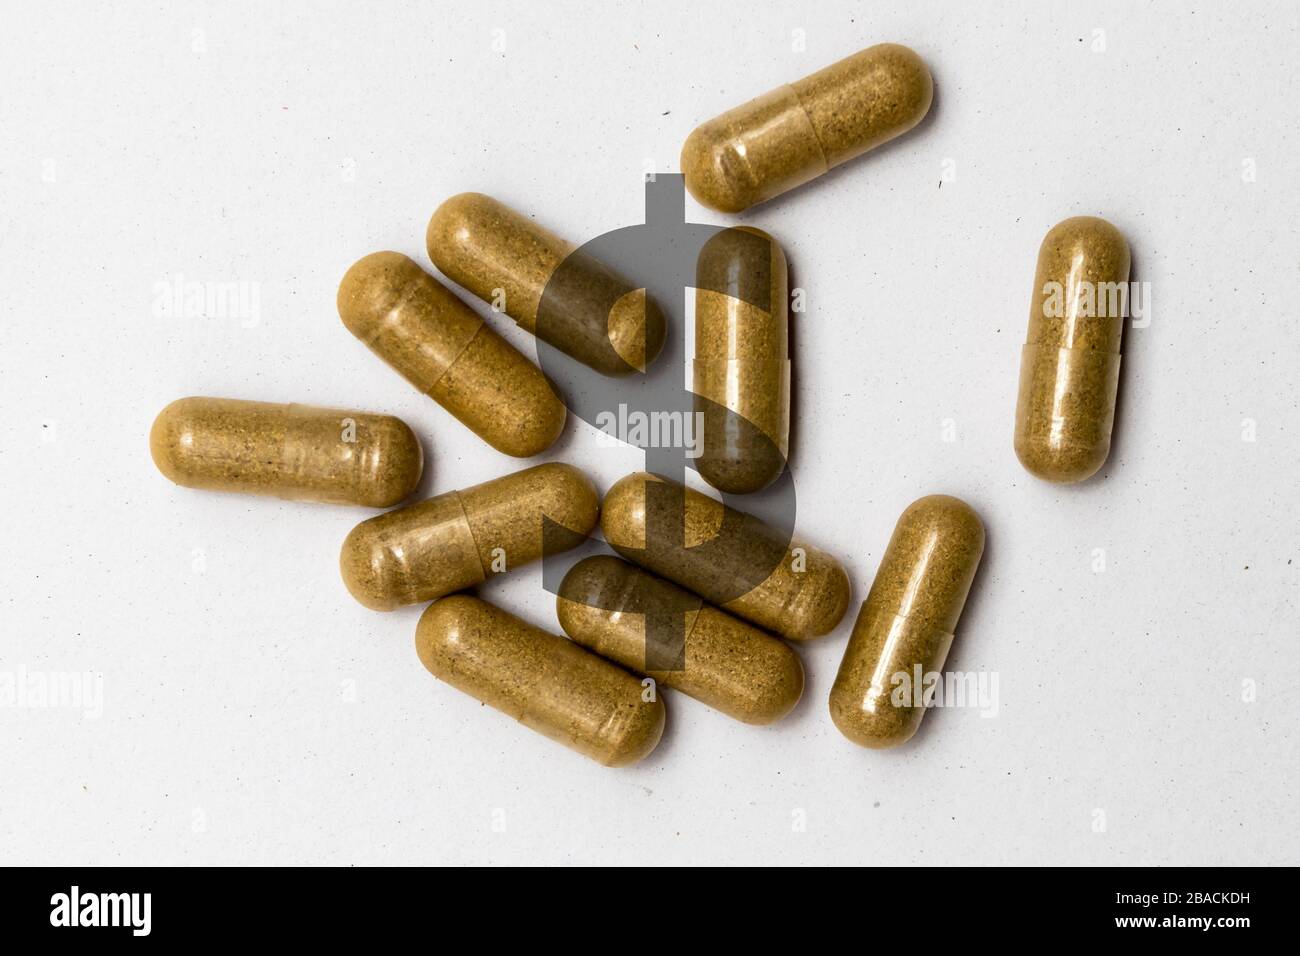 Slow release capsules on a white background with dollar sign illustrating cost of prescription drugs Stock Photo